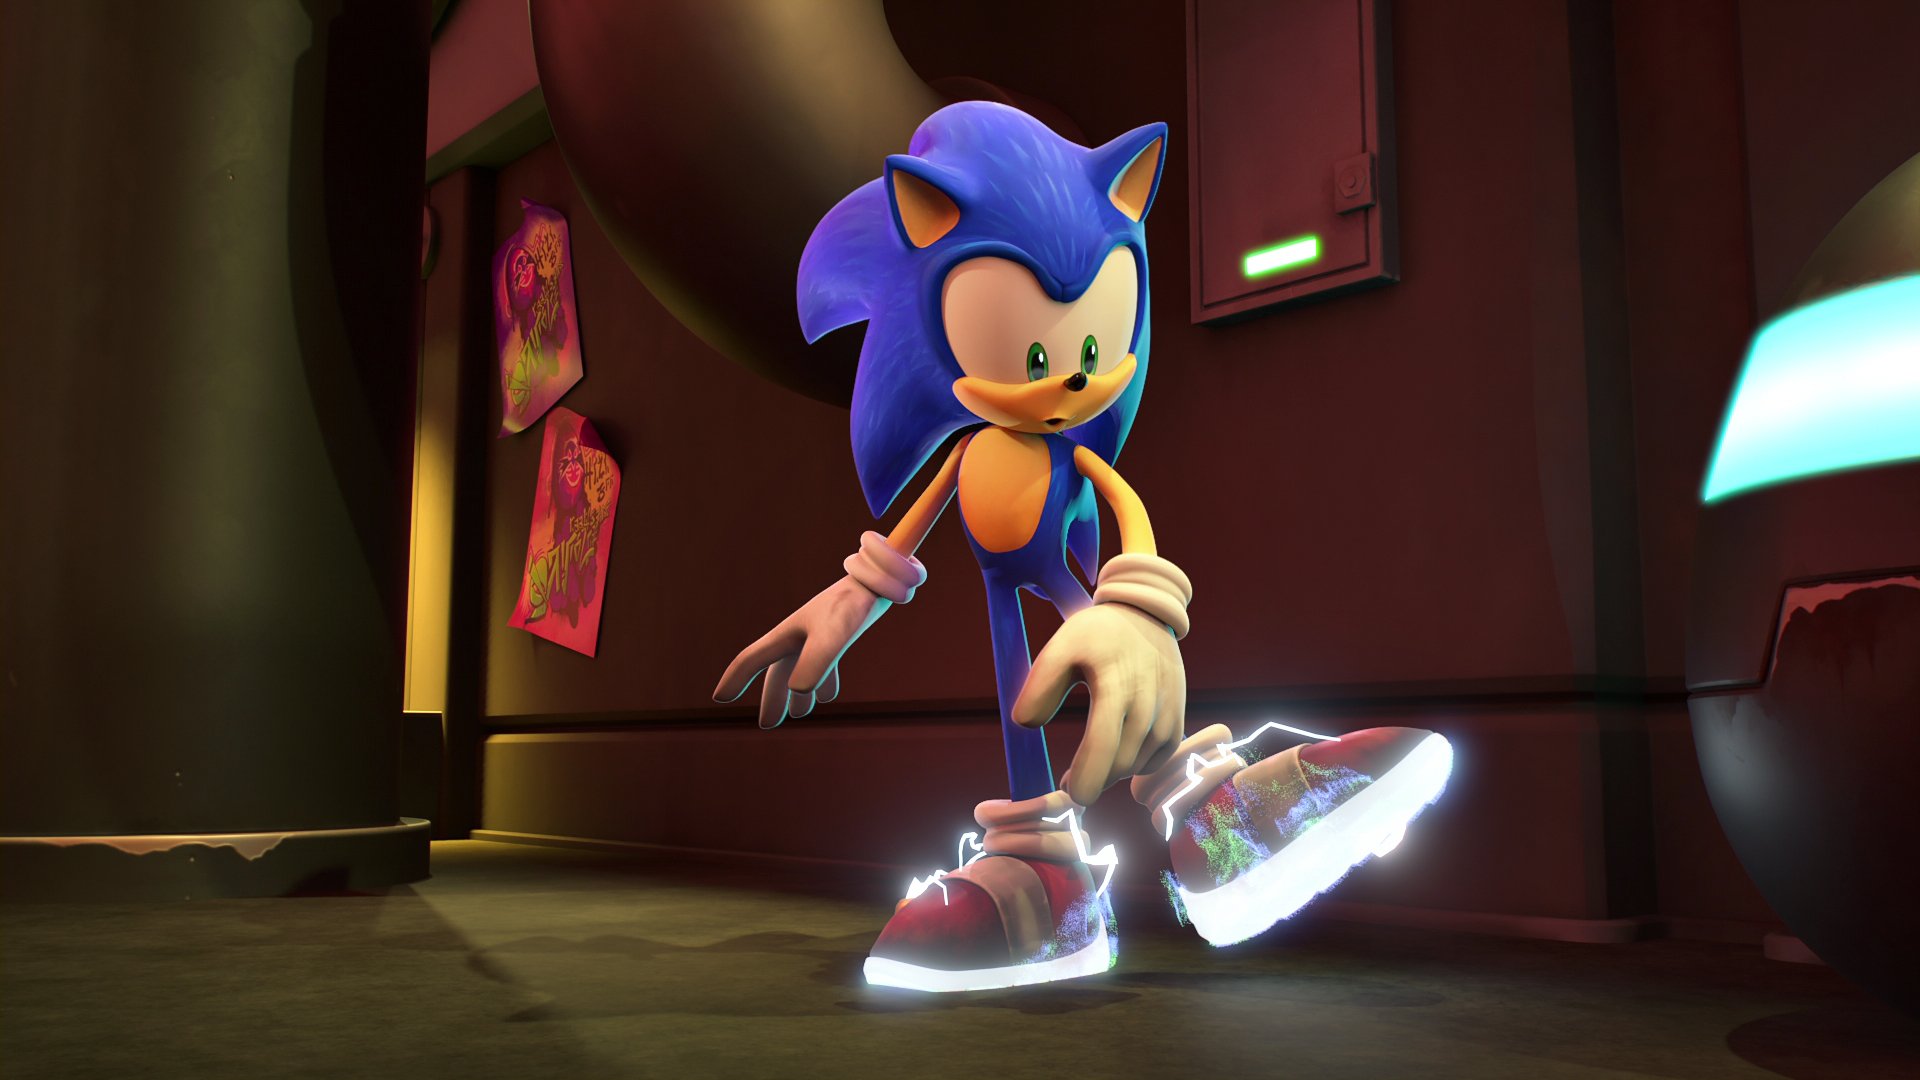 Review: 'Sonic Prime' Makes Bold Creative Decisions — Do They Pay